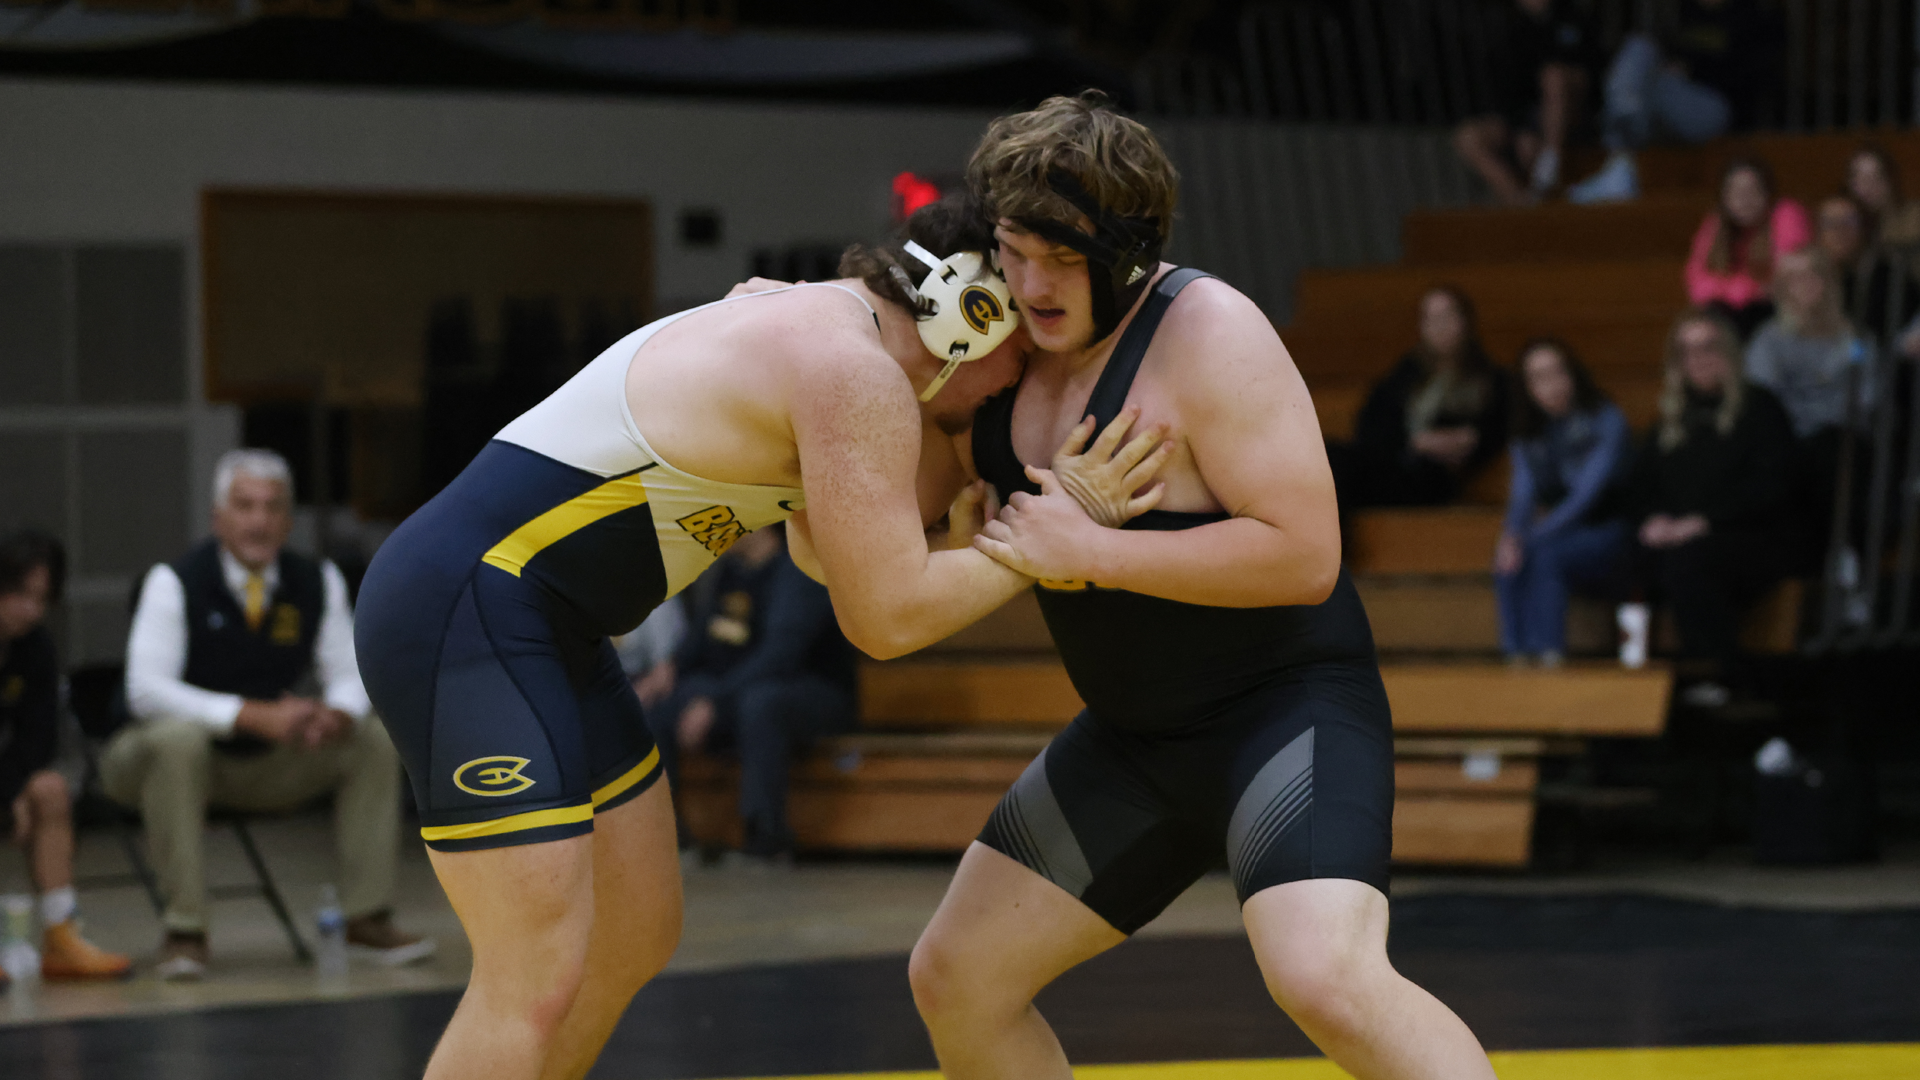 Brodie Driessen earned a pin with a 2:44 fall against his Muskie opponent on Thursday